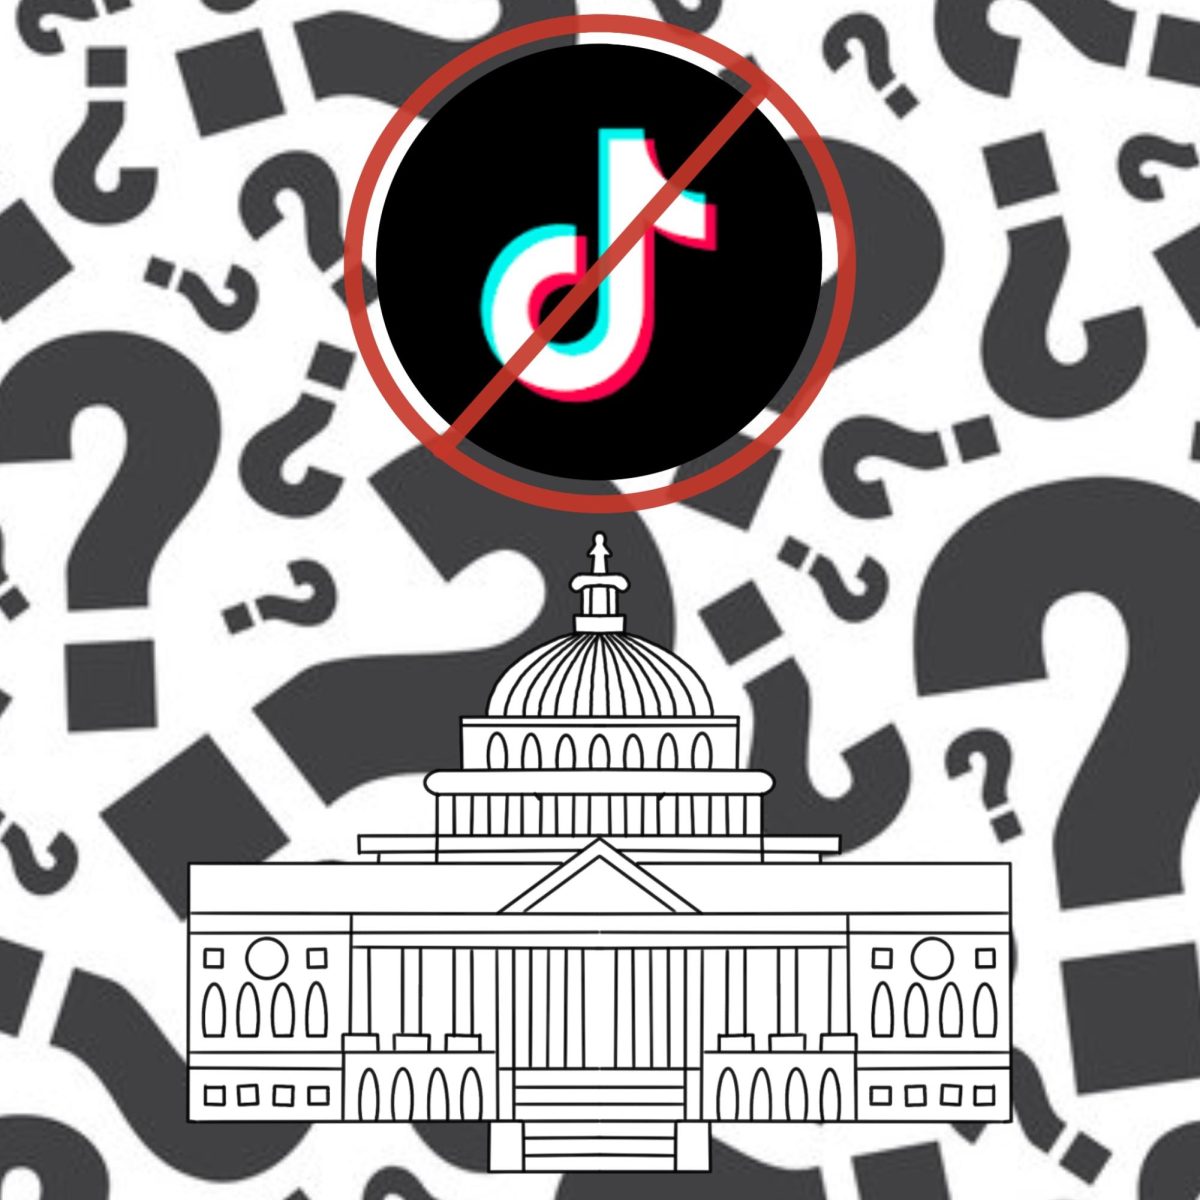 TikTok could possibly be banned within the next 5-6 months if the Senate can pass the bill. President Biden has already said he supports the ban. 